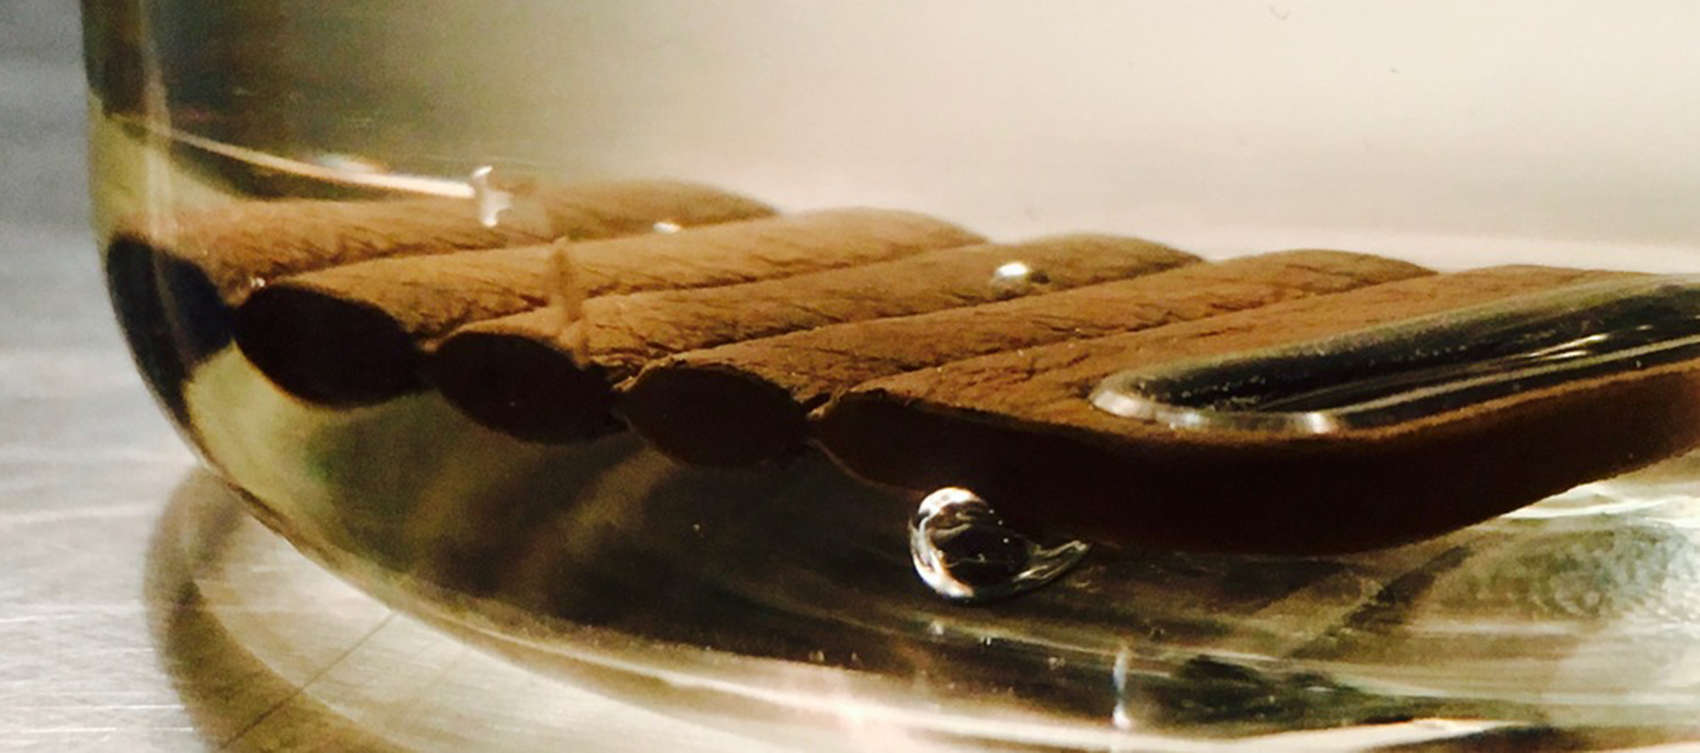 After four unscientific soaks in water, the Loop leather band for Apple Watch showed no visible signs of damage.